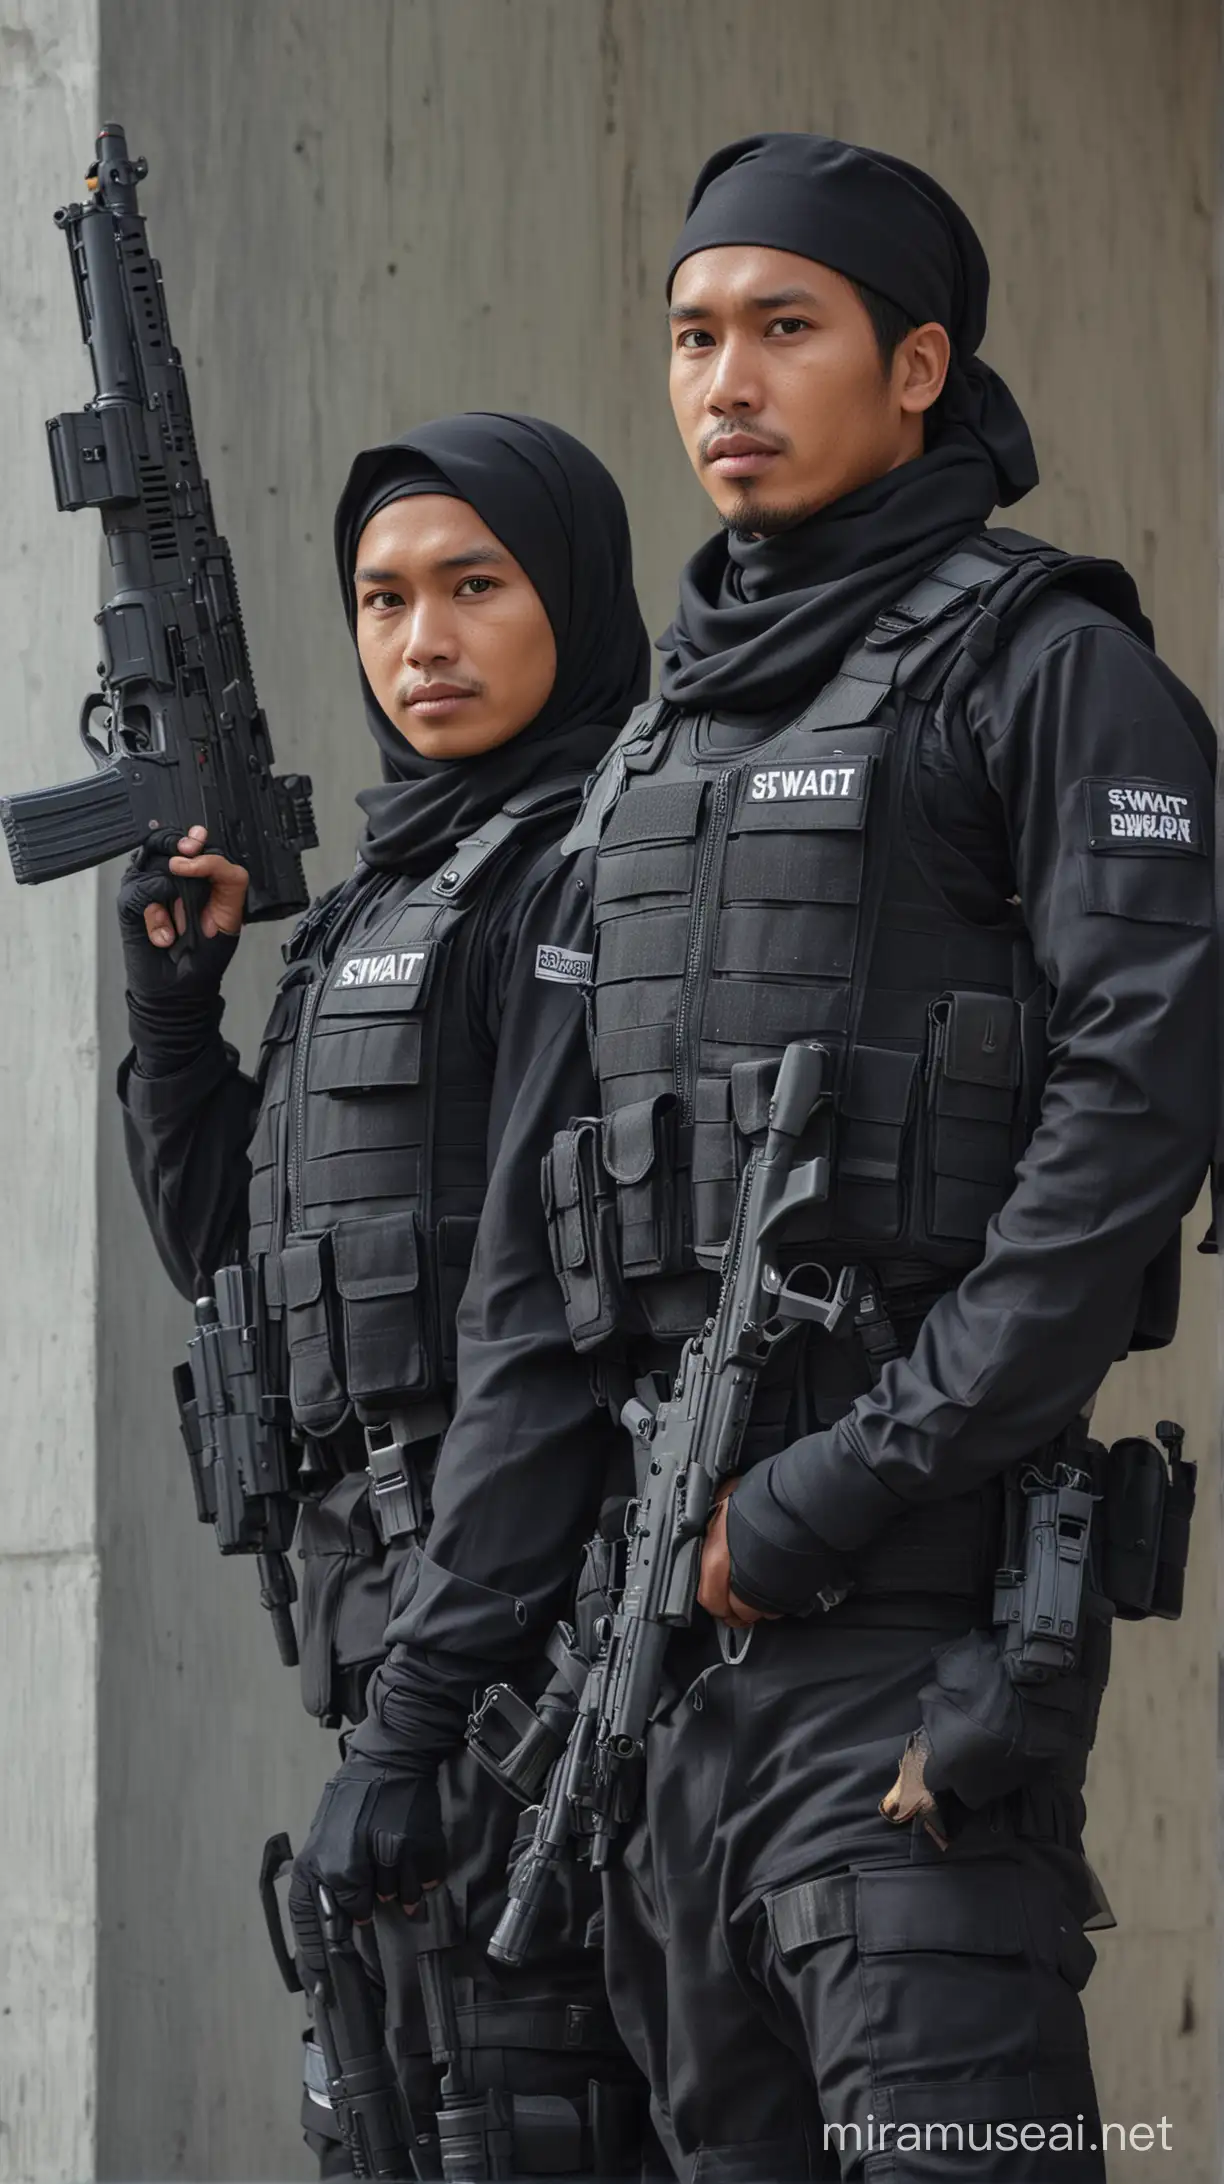 Indonesian SWAT Police Officers in Action